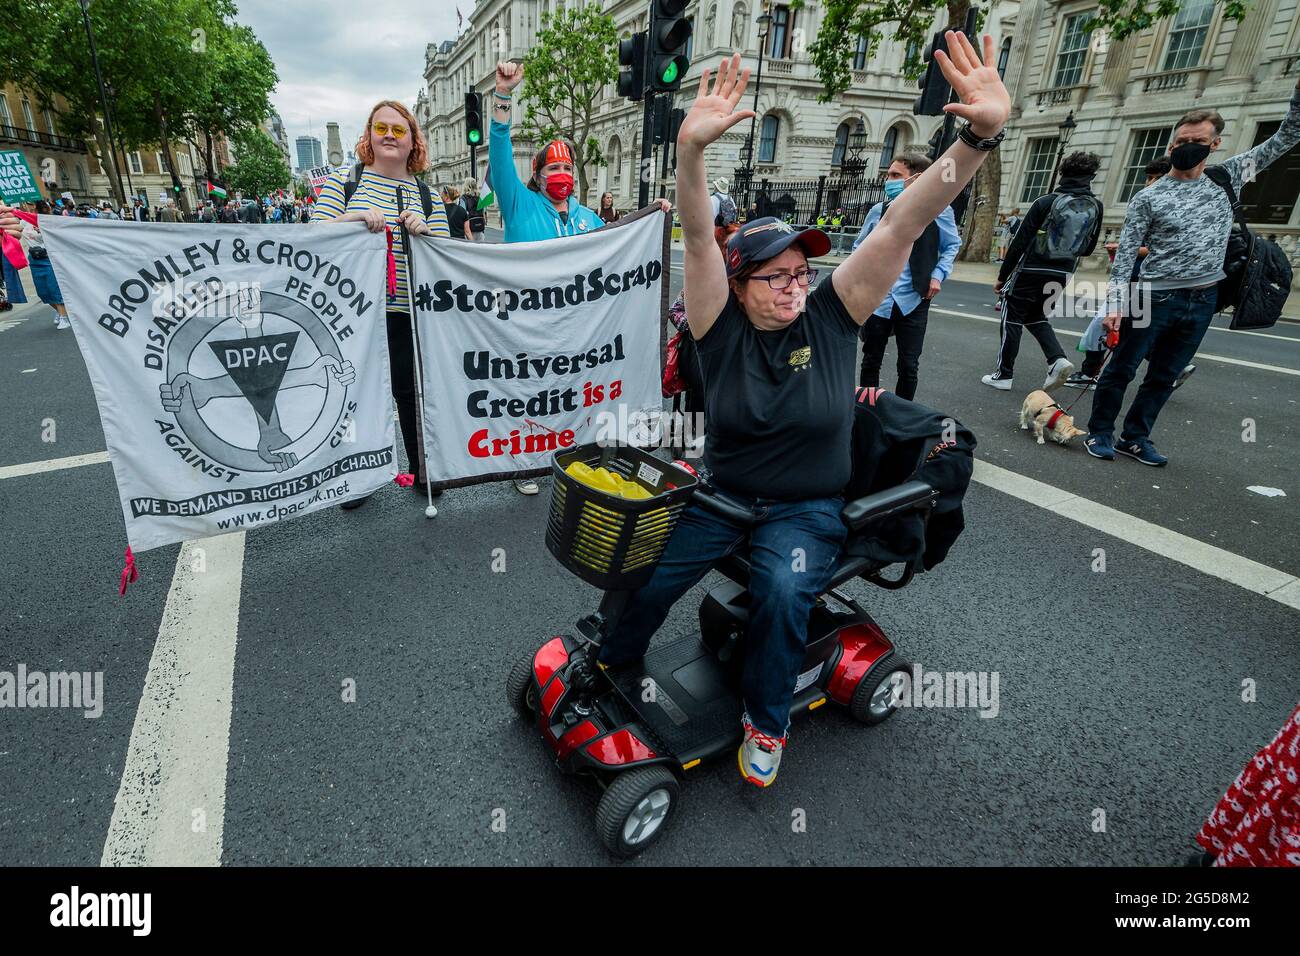 London, UK. 26 Jun 2021. The march arrives in Whitehall and passes Downing Street and is met by the disabled group - The Peoples Assembly leads a national demonstration to #DemandANewNormal. They aim to confront the approach of the current government. Specifically they are against the the public sector pay freeze, lack of sick pay, fire and rehire policies as well as the Police, Crime, Sentencing and Courts Bill. The protest is supported by many Unions including Unite and PCS, organisations like Free Palestine, Stand Up to Racism and environmental groups like Extinction Rebellion. The March st Stock Photo